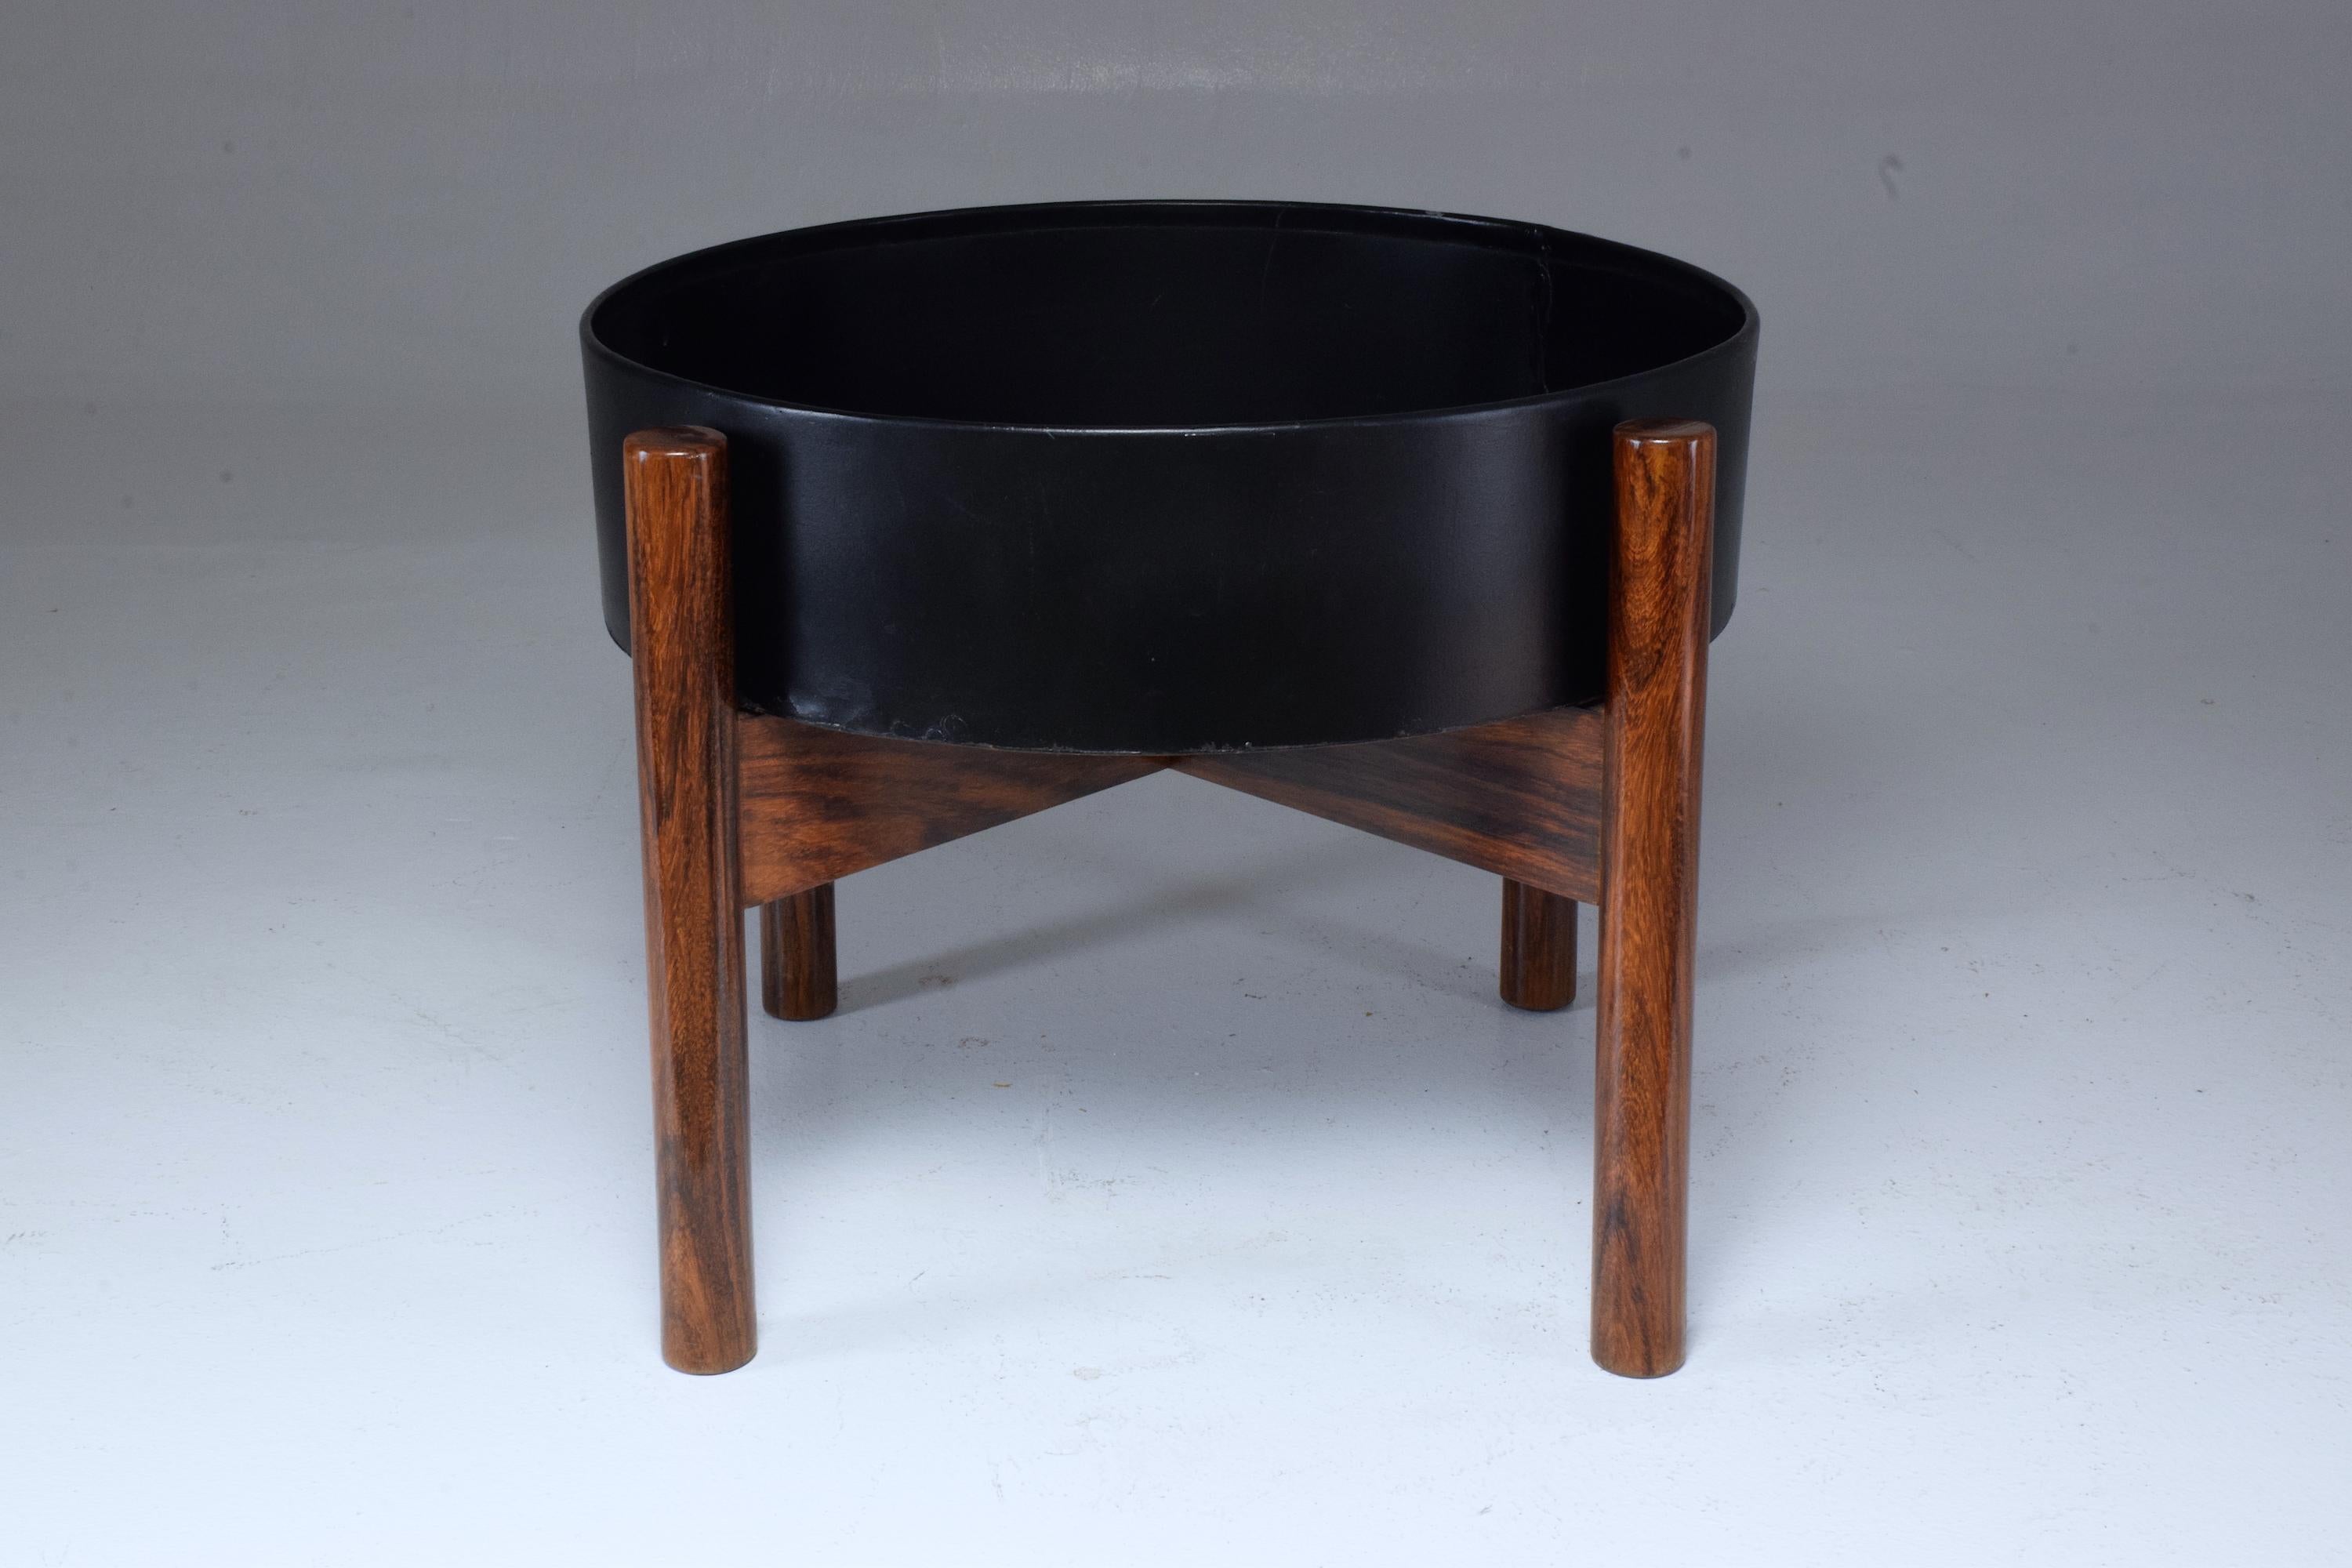 Striking 20th century vintage Scandinavian circular planter or jardinière, composed of a solid rosewood structure and a removable black lacquered metallic insert.
A rare midcentury model.
The wood has been re-varnished and it is possible to